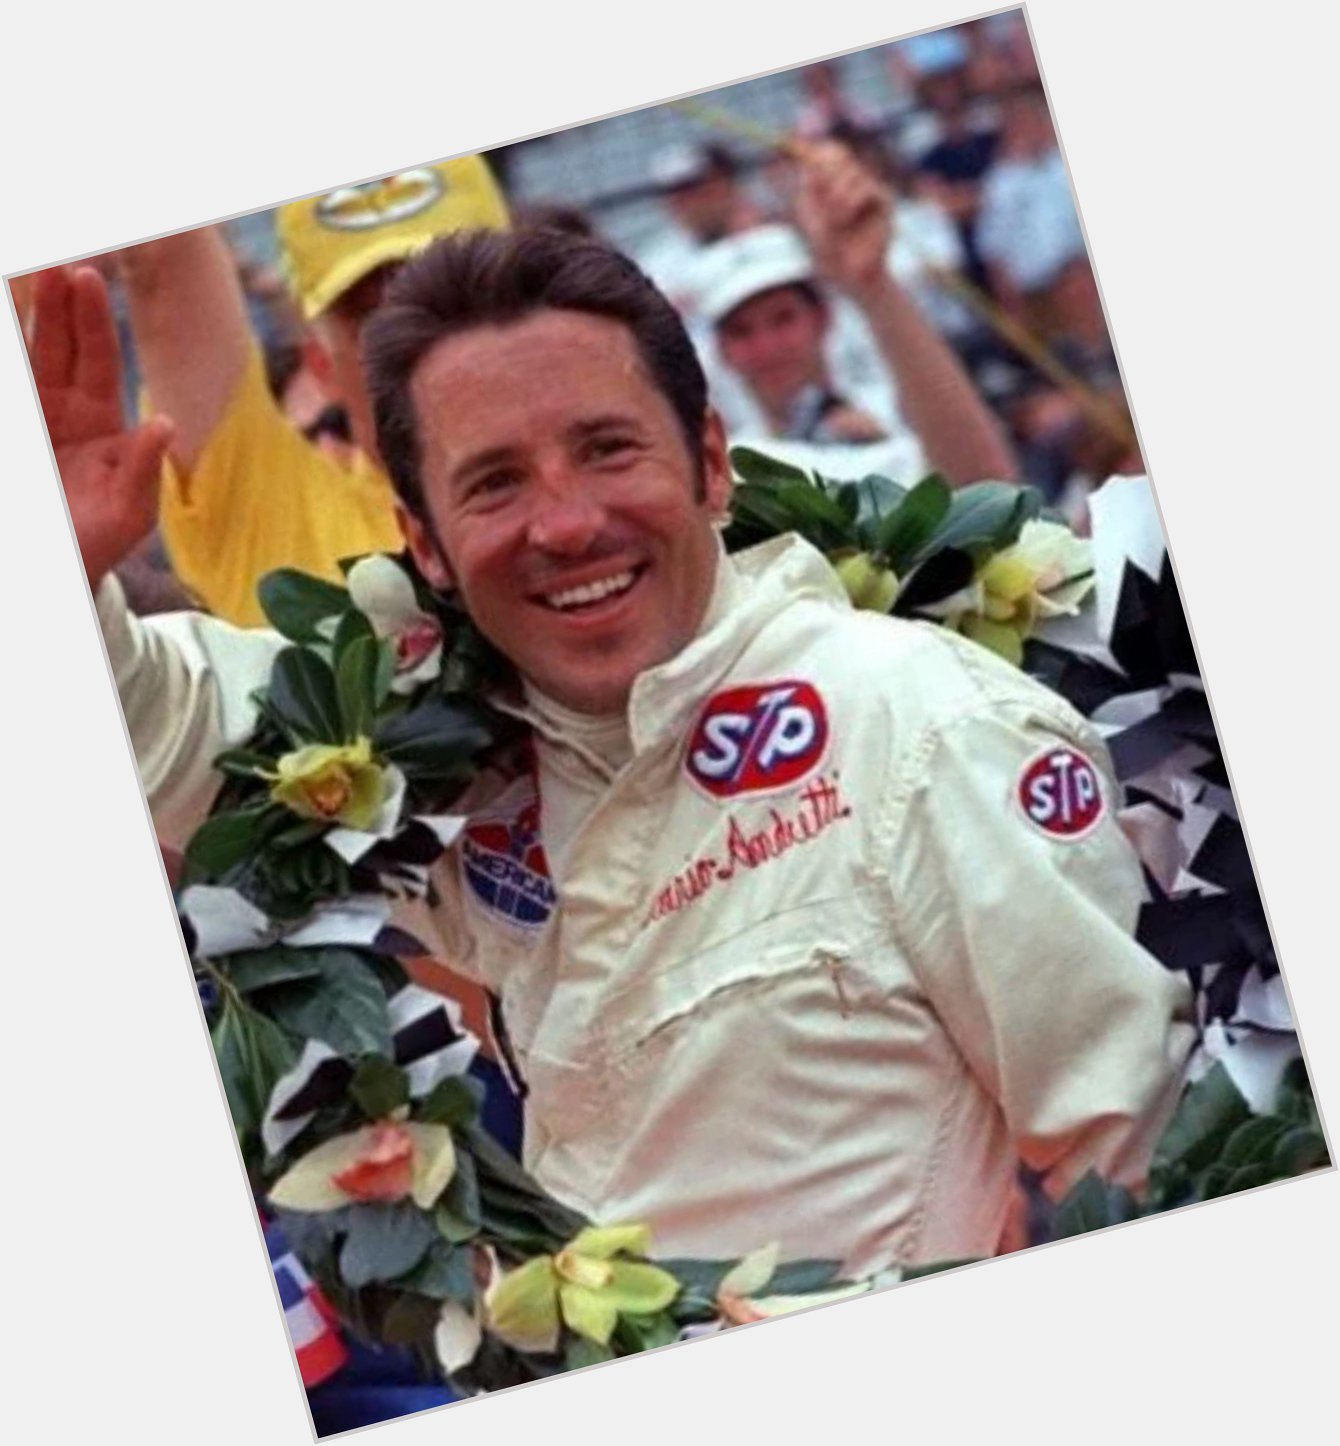 Happy Birthday Mario Andretti! Winner of the 1969 Indy 500 in this pic, 50 years ago. 